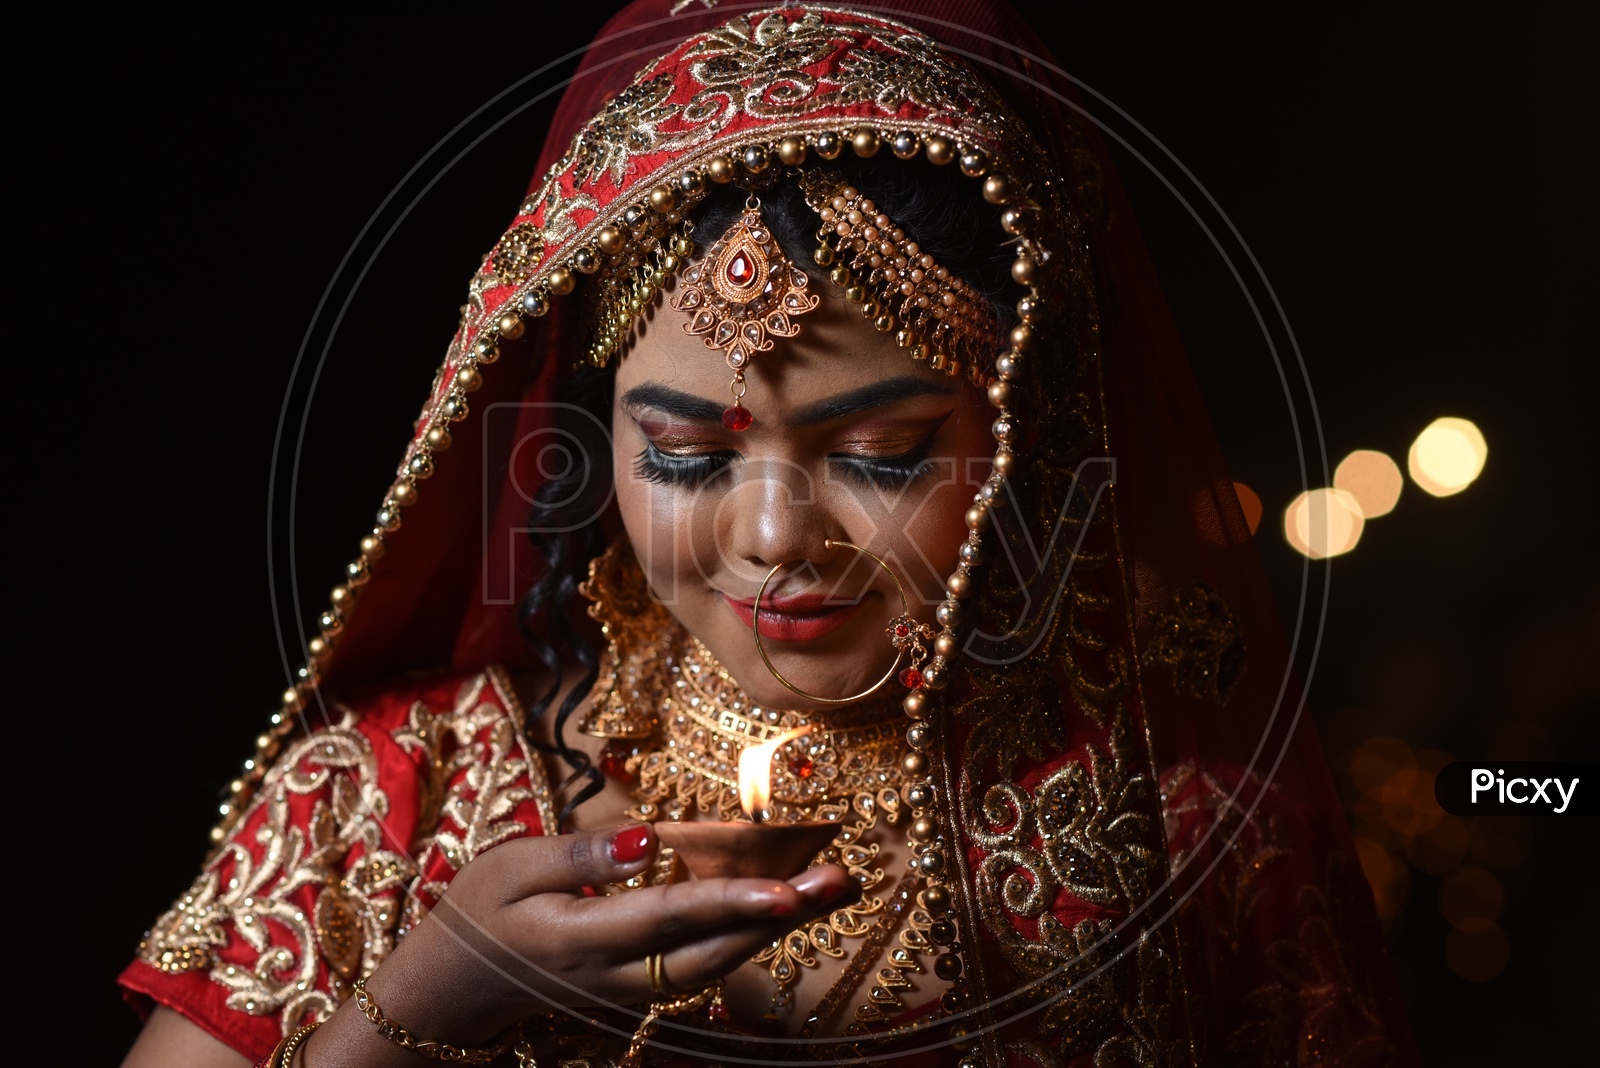 A Traditional Indian Woman  In Elegant Look With Diwali Dias and Posing